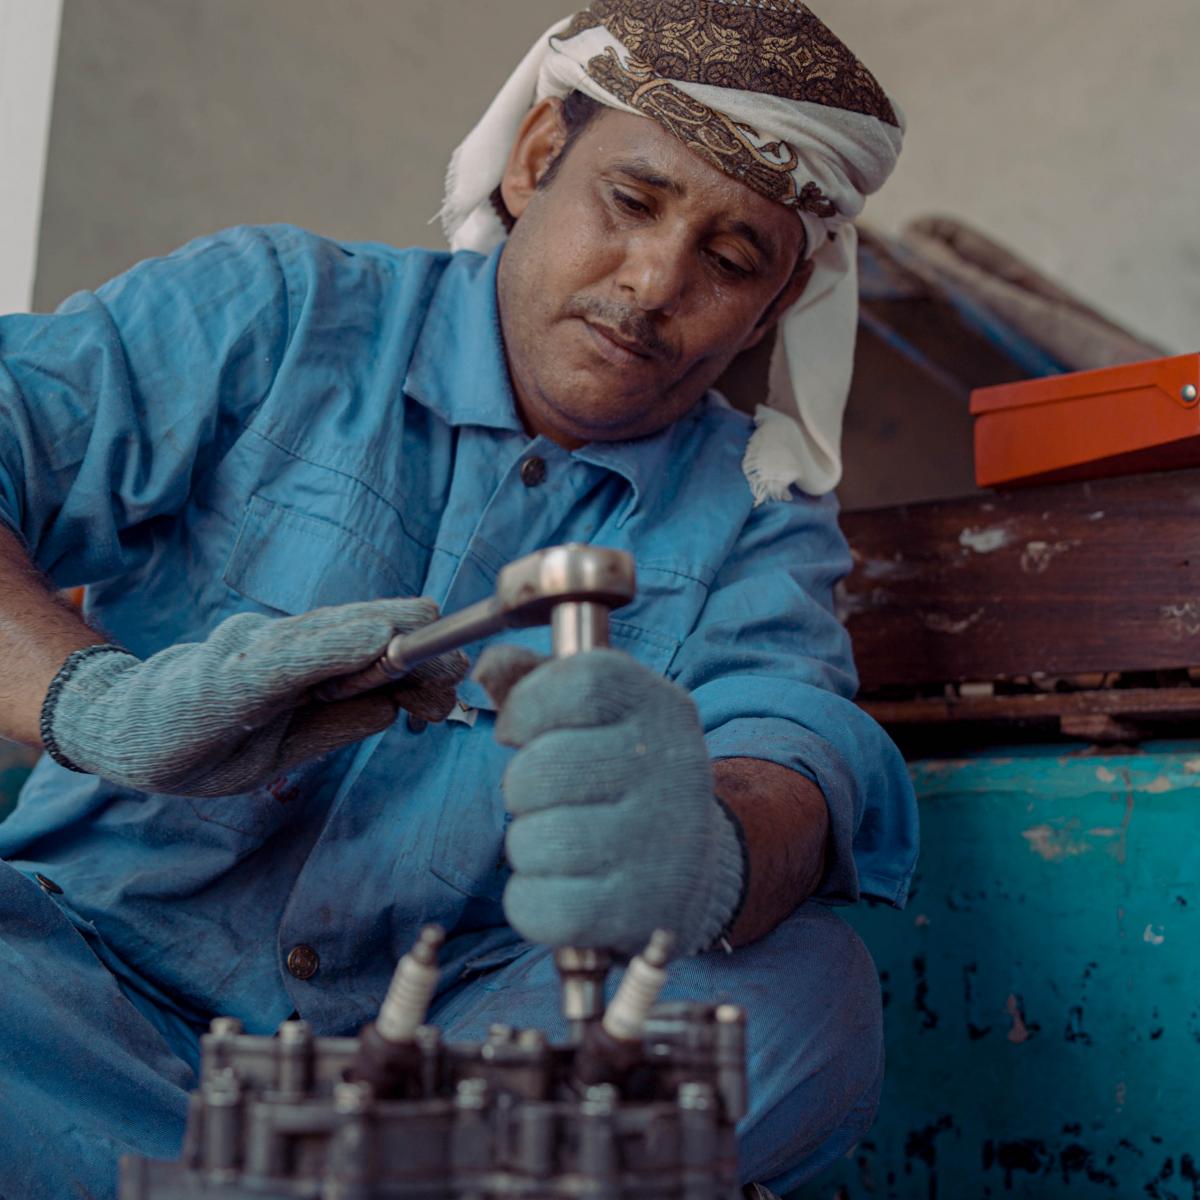 Man seated repairing an engine with tools.